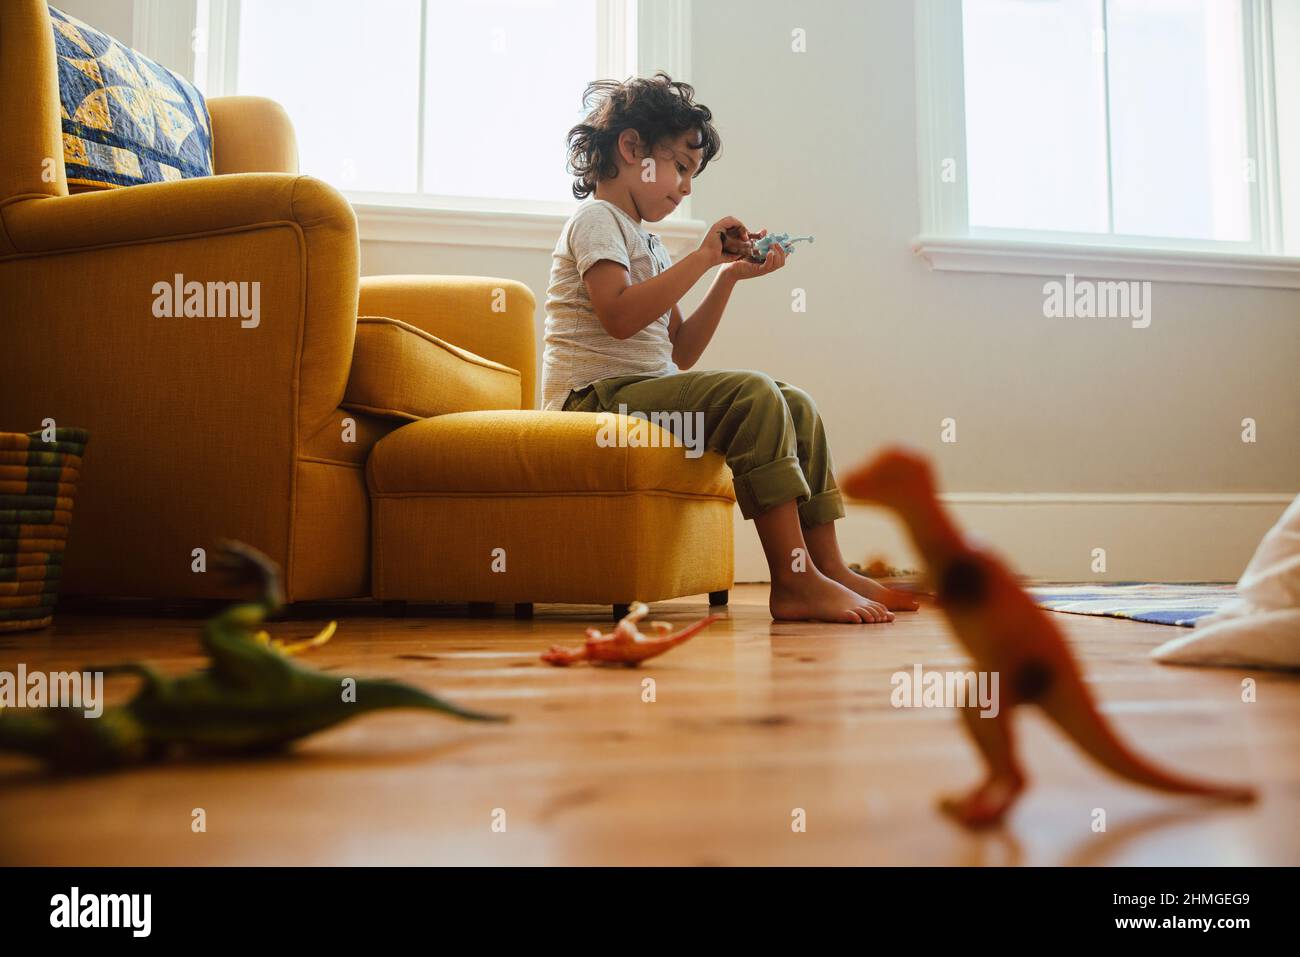 Little boy playing with colourful animal toys in his play area at home. Adorable young boy sitting on a couch while playing a fight game with dinosaur Stock Photo